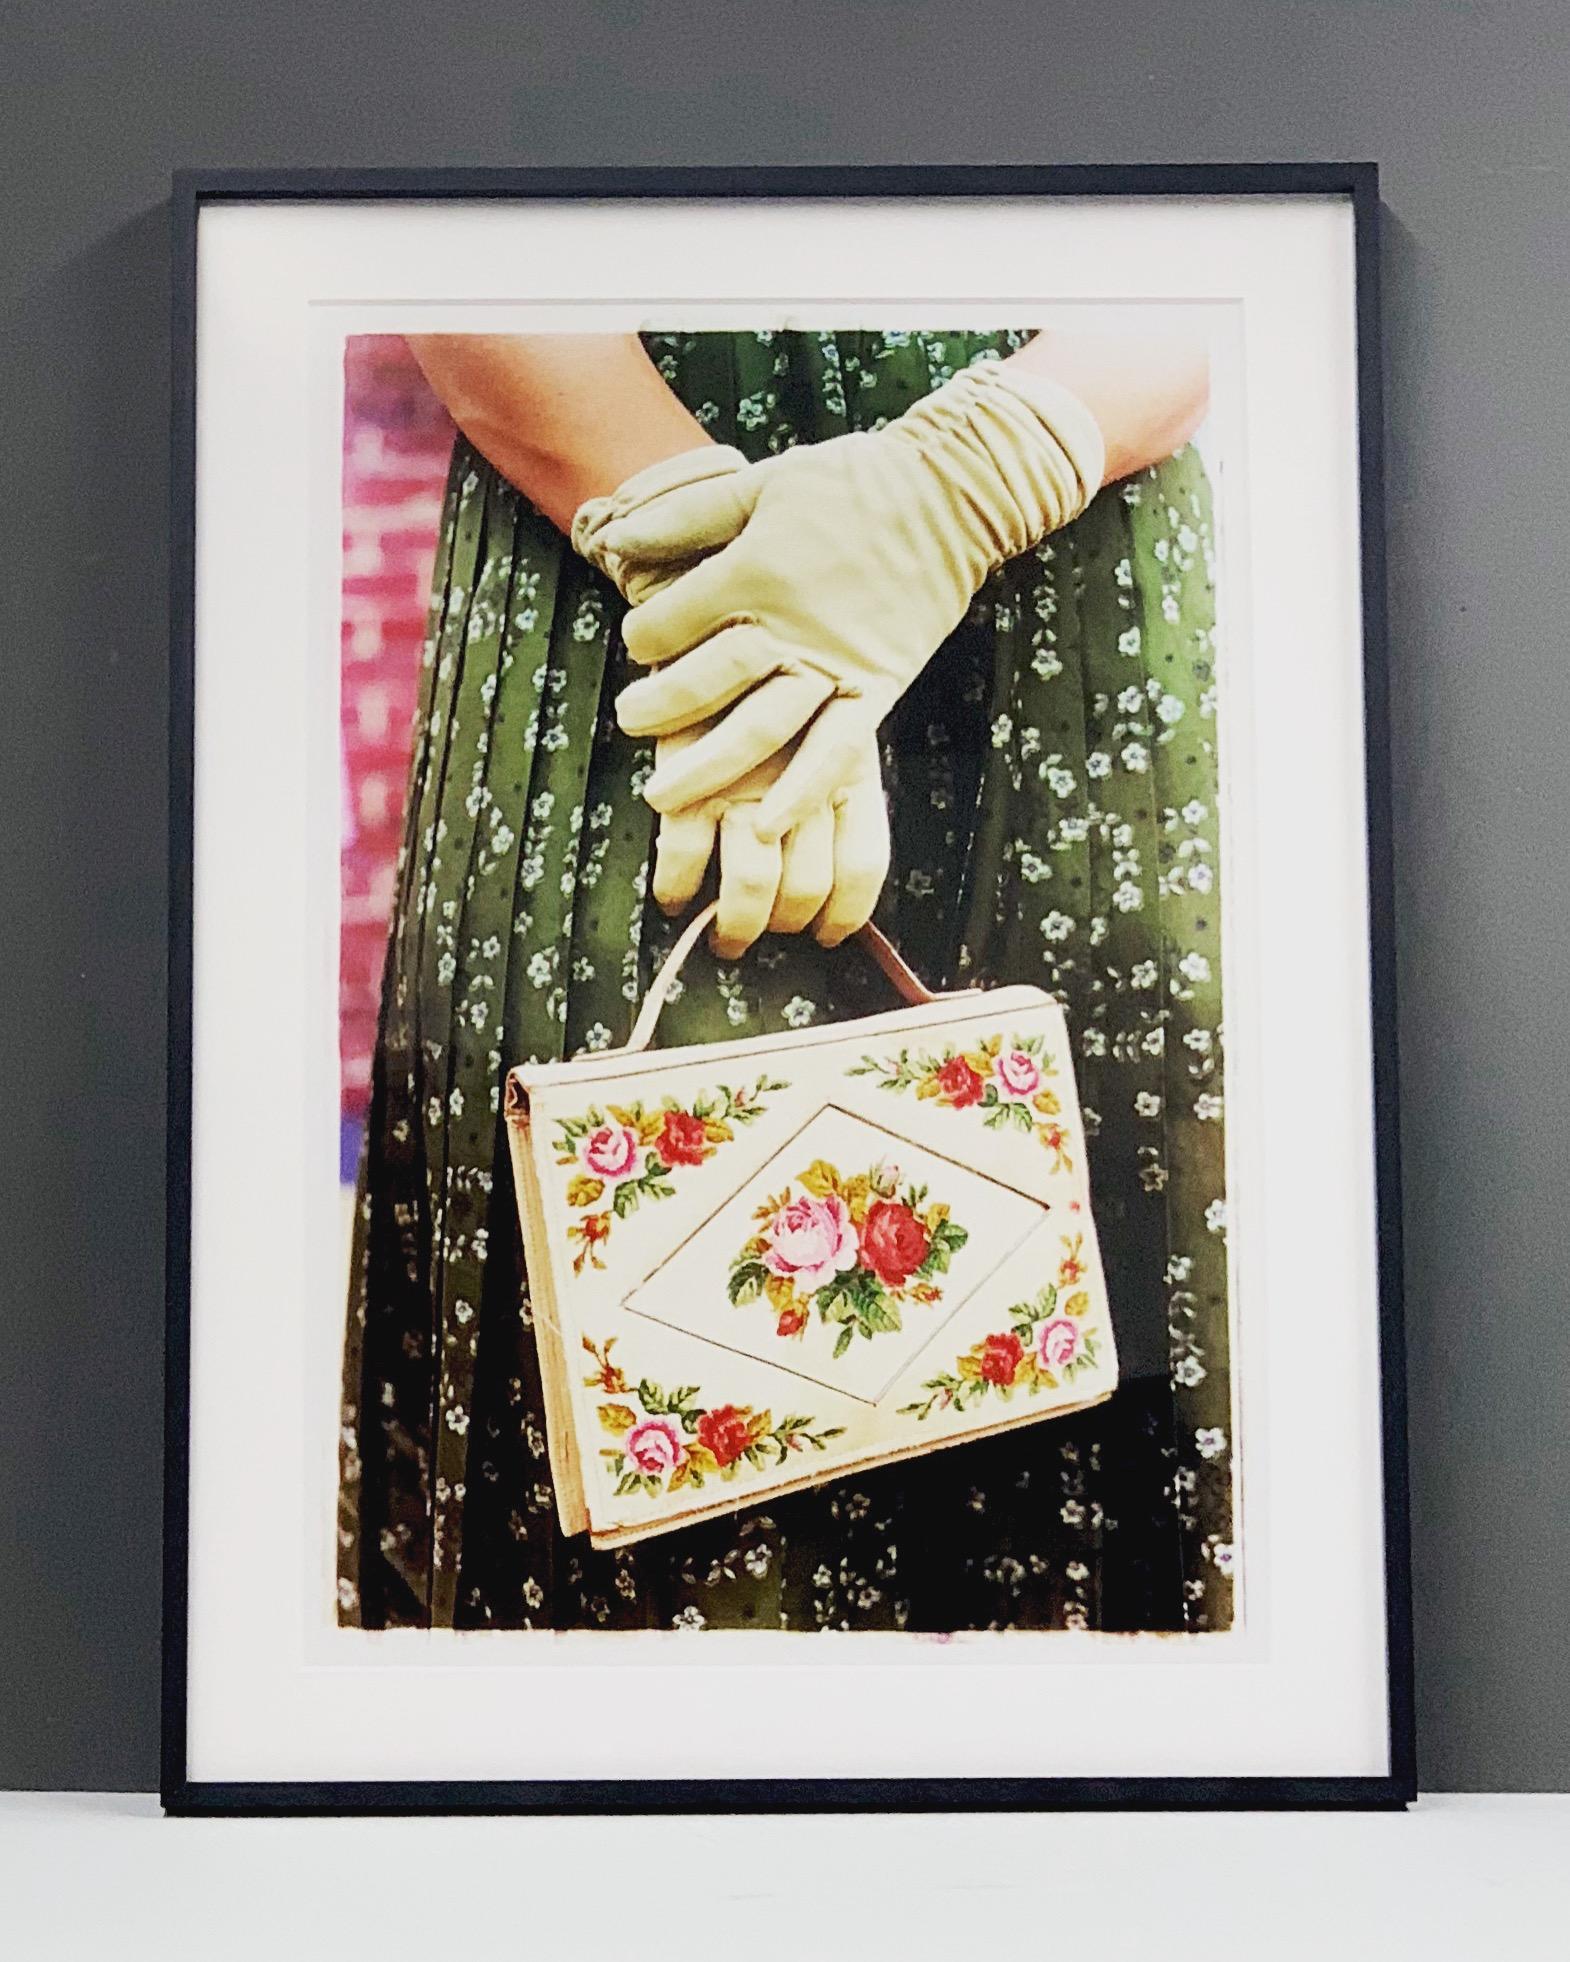 This stylish artwork, 'Gloves & Handbag' taken at the glamorous retro event Goodwood Revival, perfectly captures feminine sophistication with a vintage vibe.
This artwork featured in Richard Heeps 2018-2019 exhibition WEMEN at Nhow Hotel